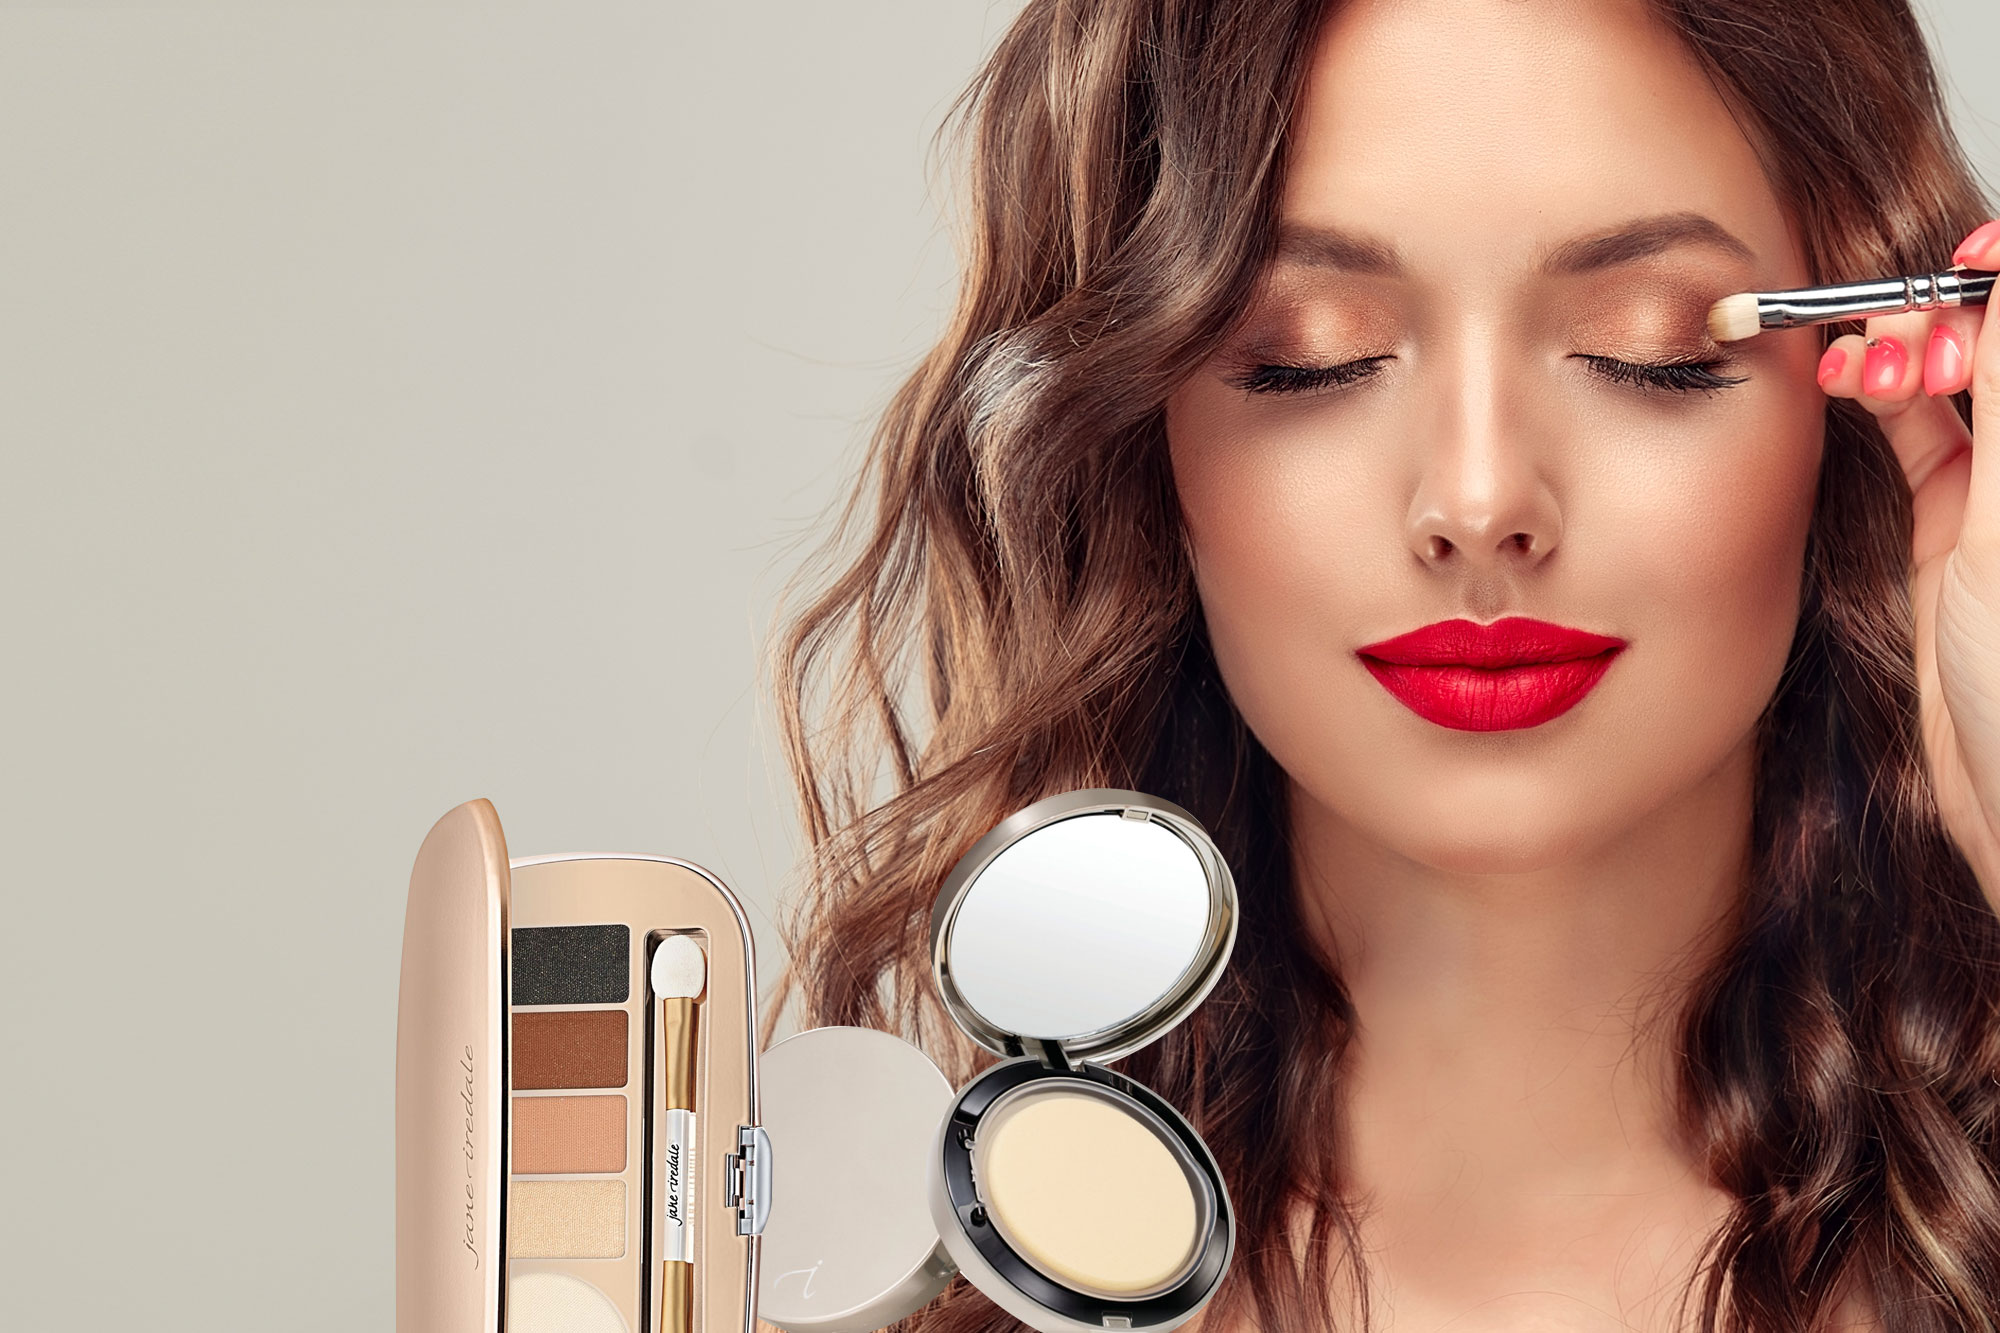 Shop Our Make-Up Collection